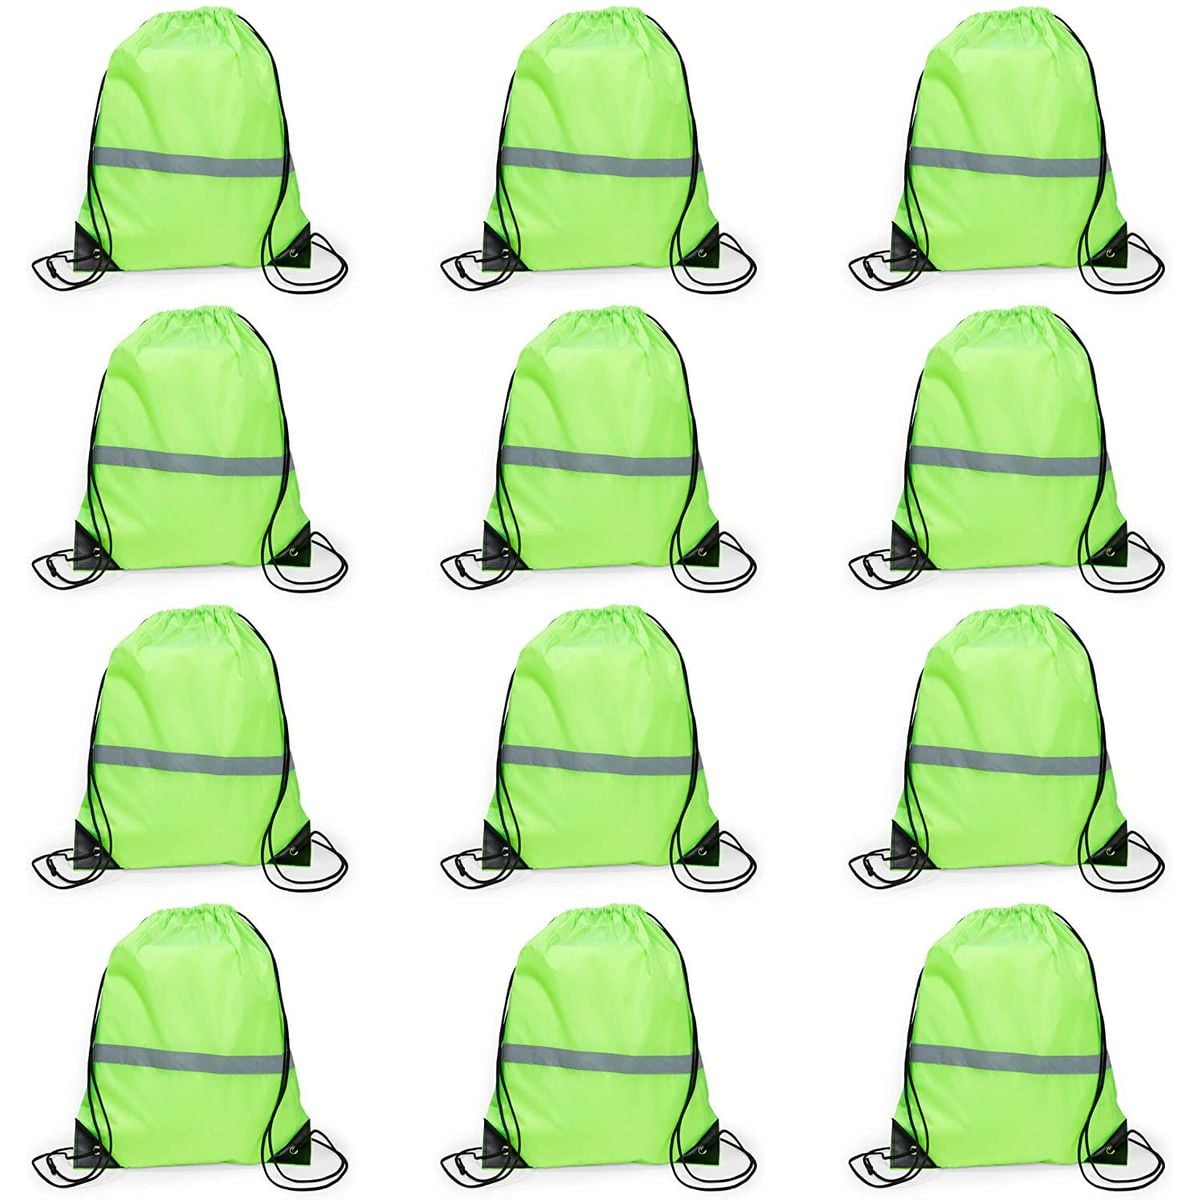 Young Men Beautiful WomenDrawstring Backpack Camouflage Black Green Yellow Outdoor Convenient Storage Bags Athletic Bag